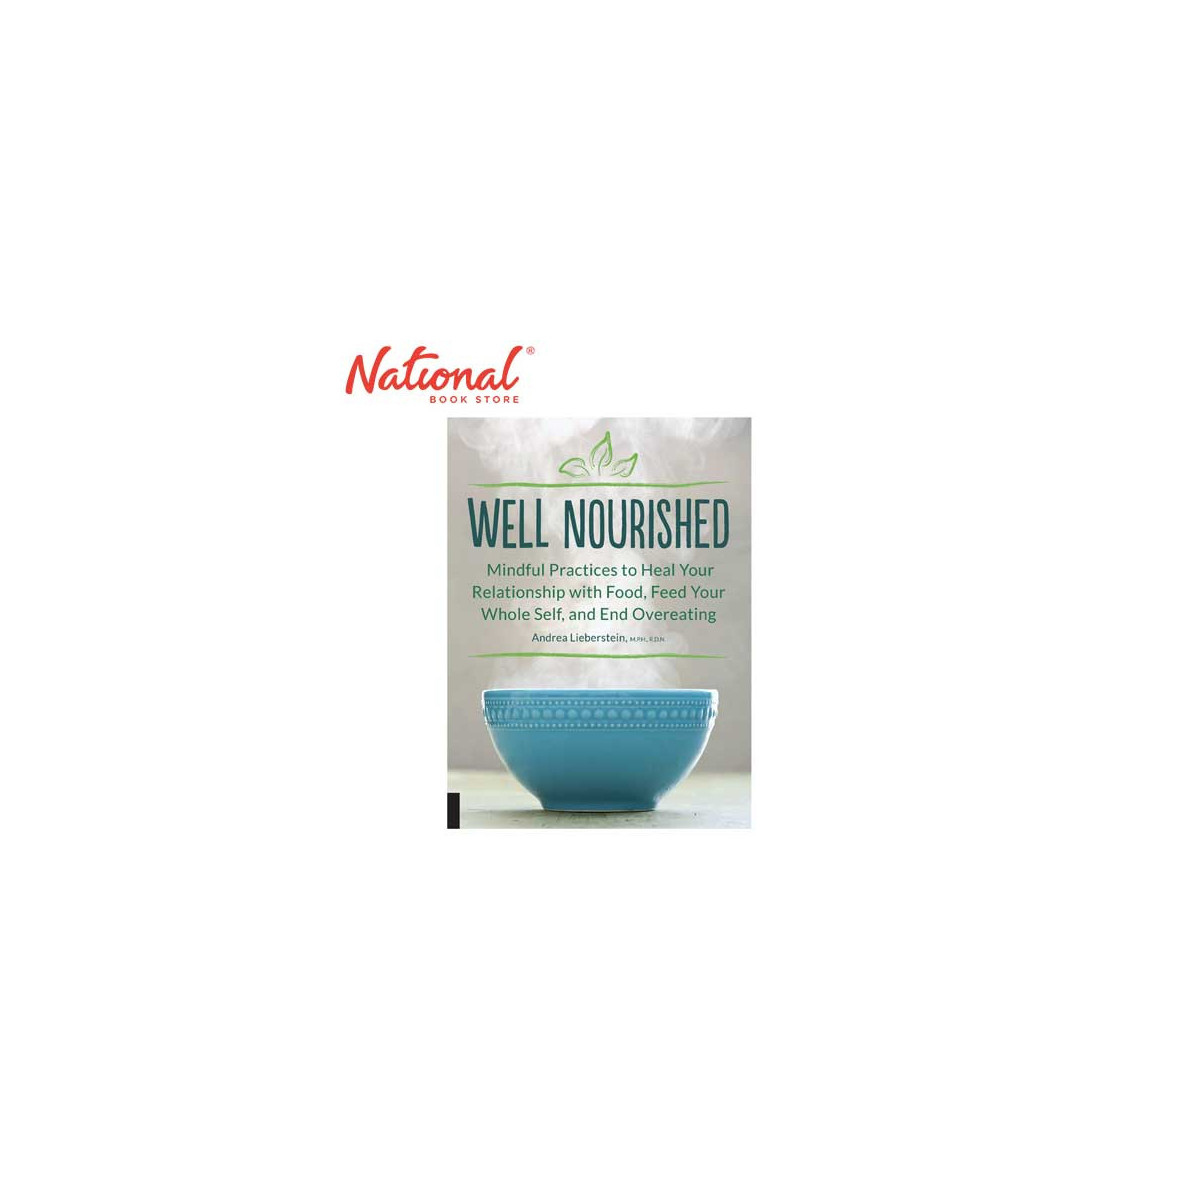 Well Nourished by Andrea Lieberstein - Trade Paperback - Health & Fitness